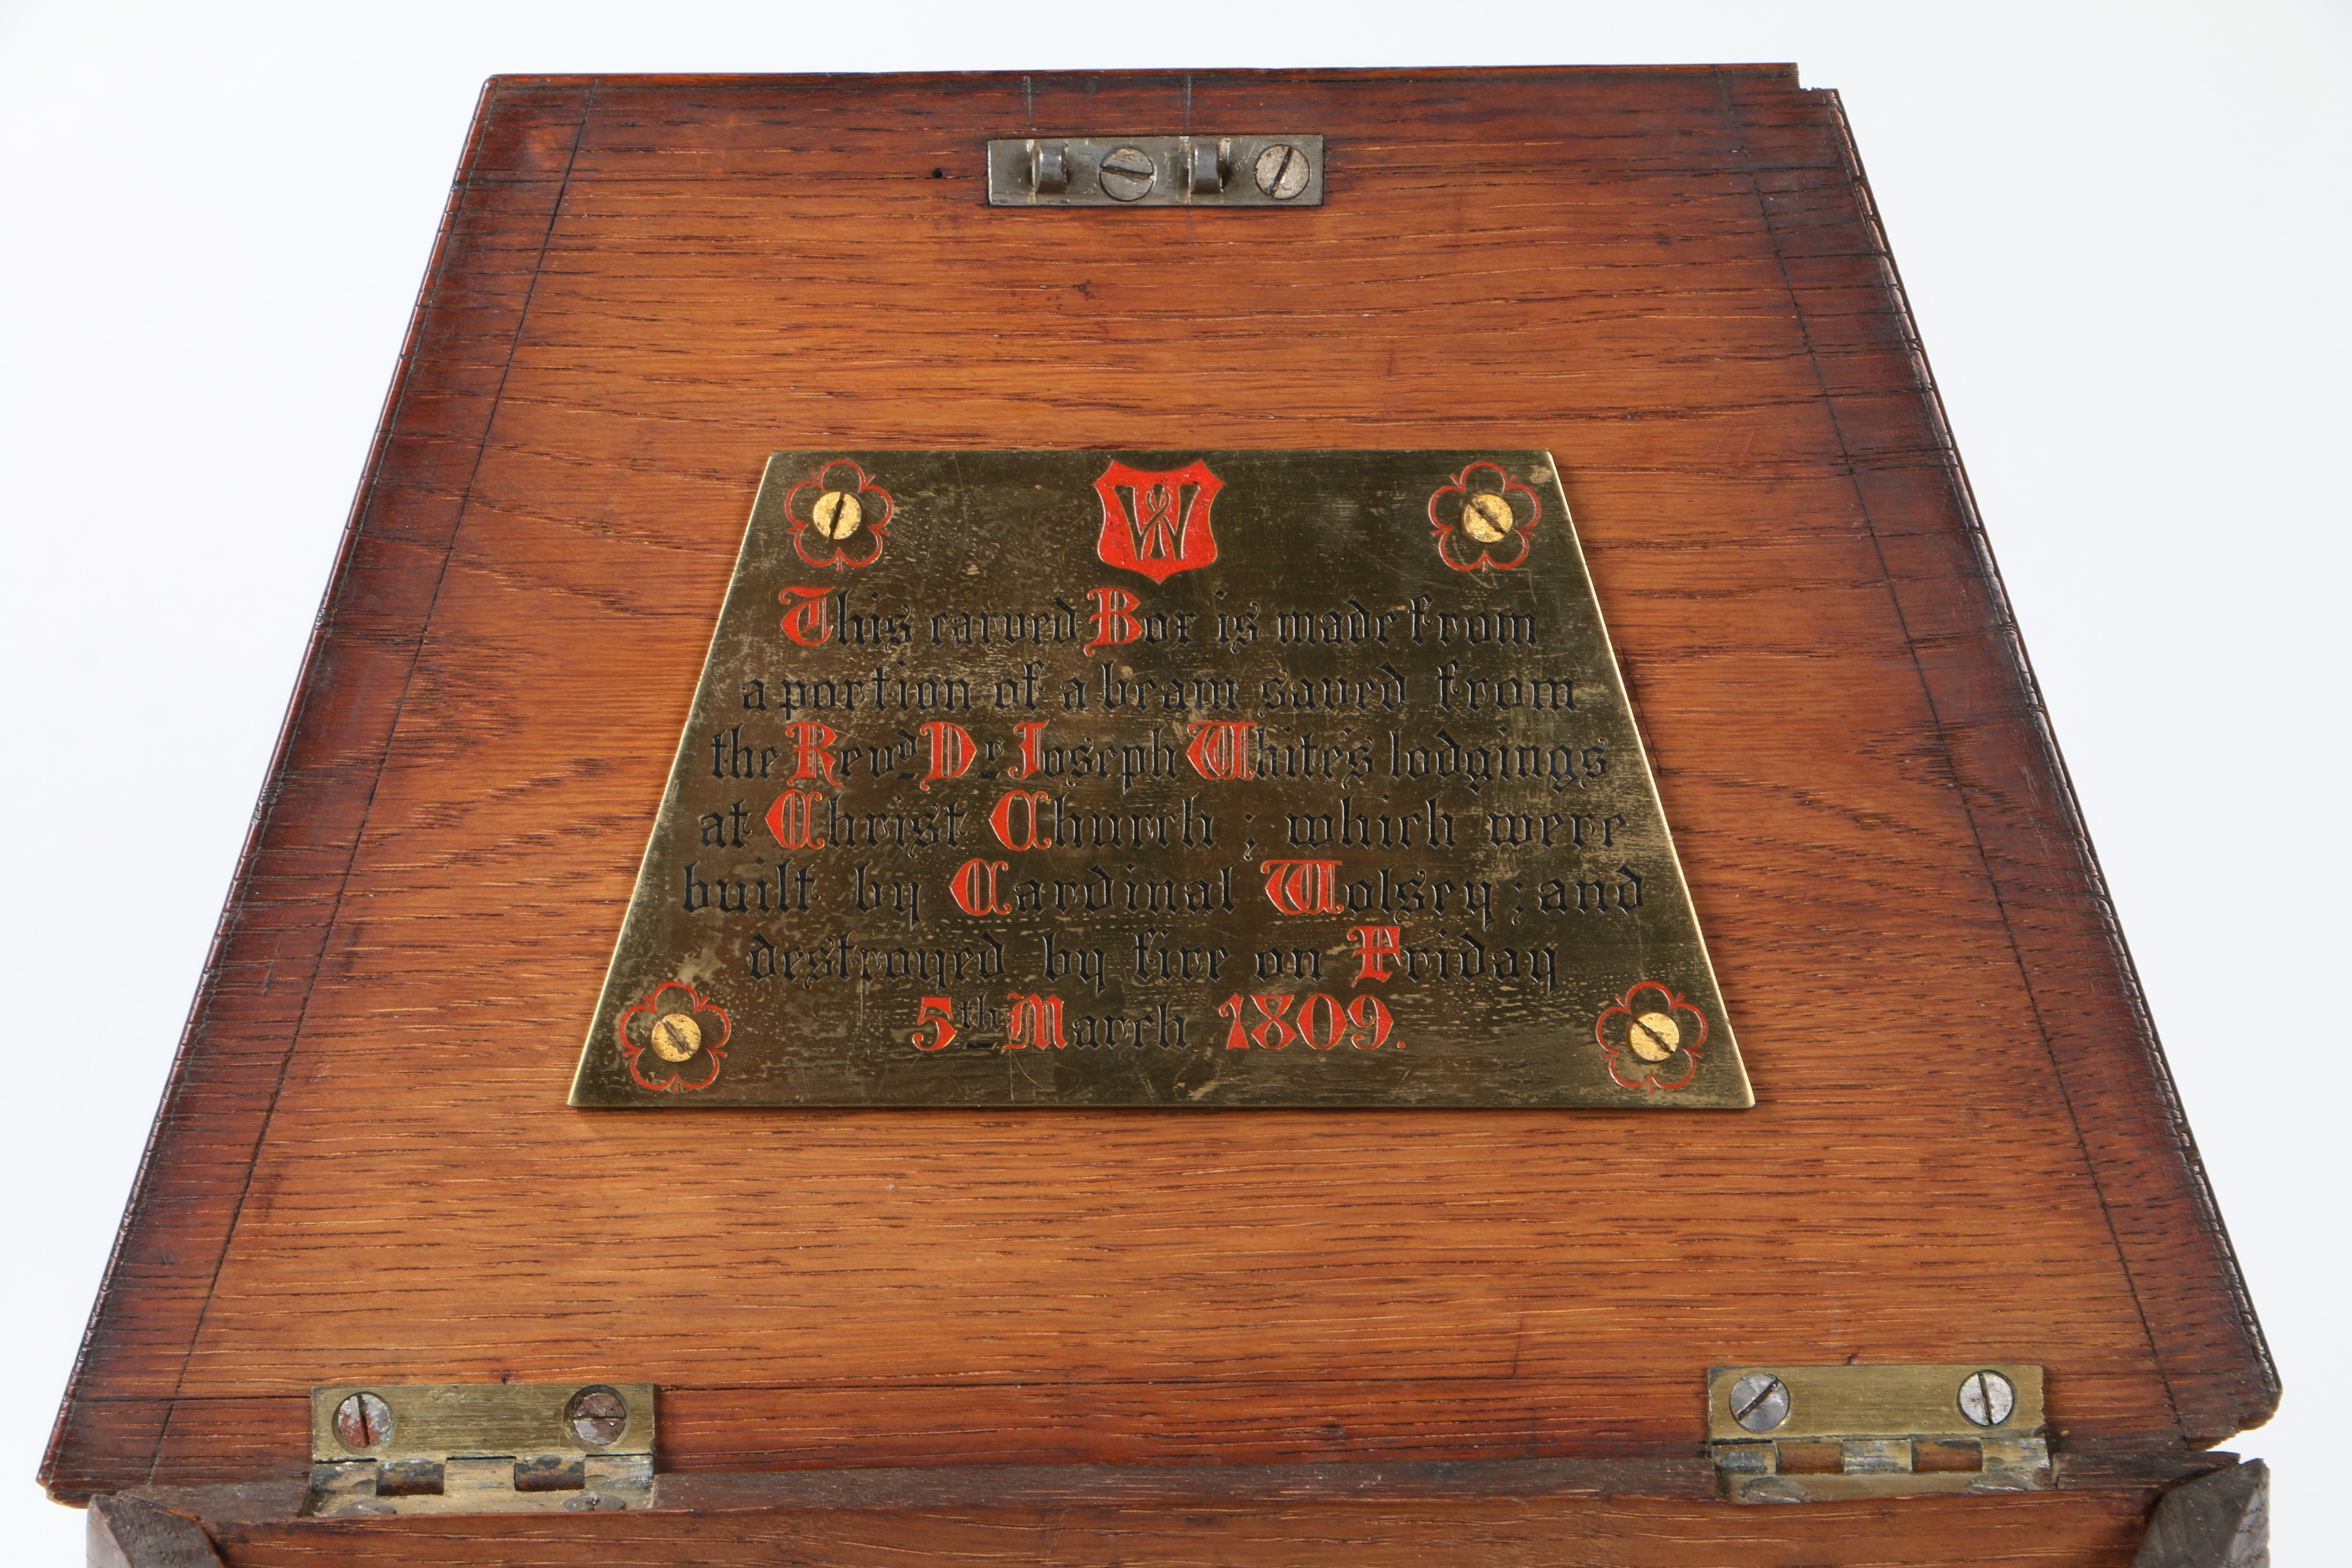 CHRIST CHURCH INTEREST - A 19TH CENTURY CARVED OAK BOX. - Image 9 of 10